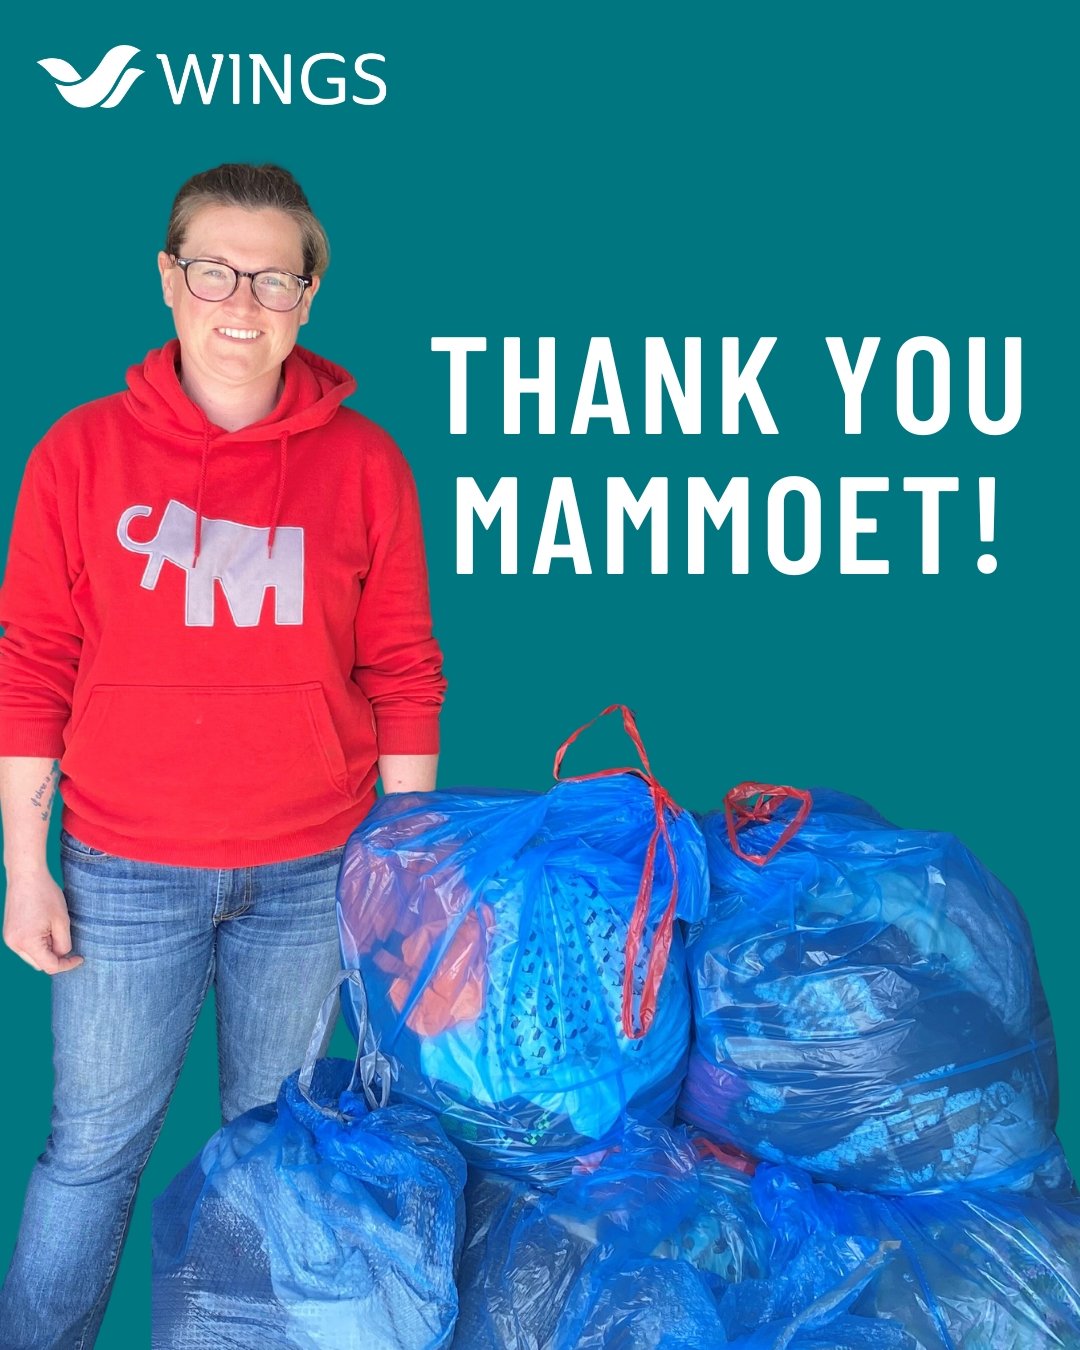 In honour of International Women's Day last month, Mammoet in Edmonton collected a large assortment of women's clothes to donate to WINGS shelter.

Thank you @mammoetglobal  and the Mammoet Team in Edmonton for helping to empower women at WINGS (Wome